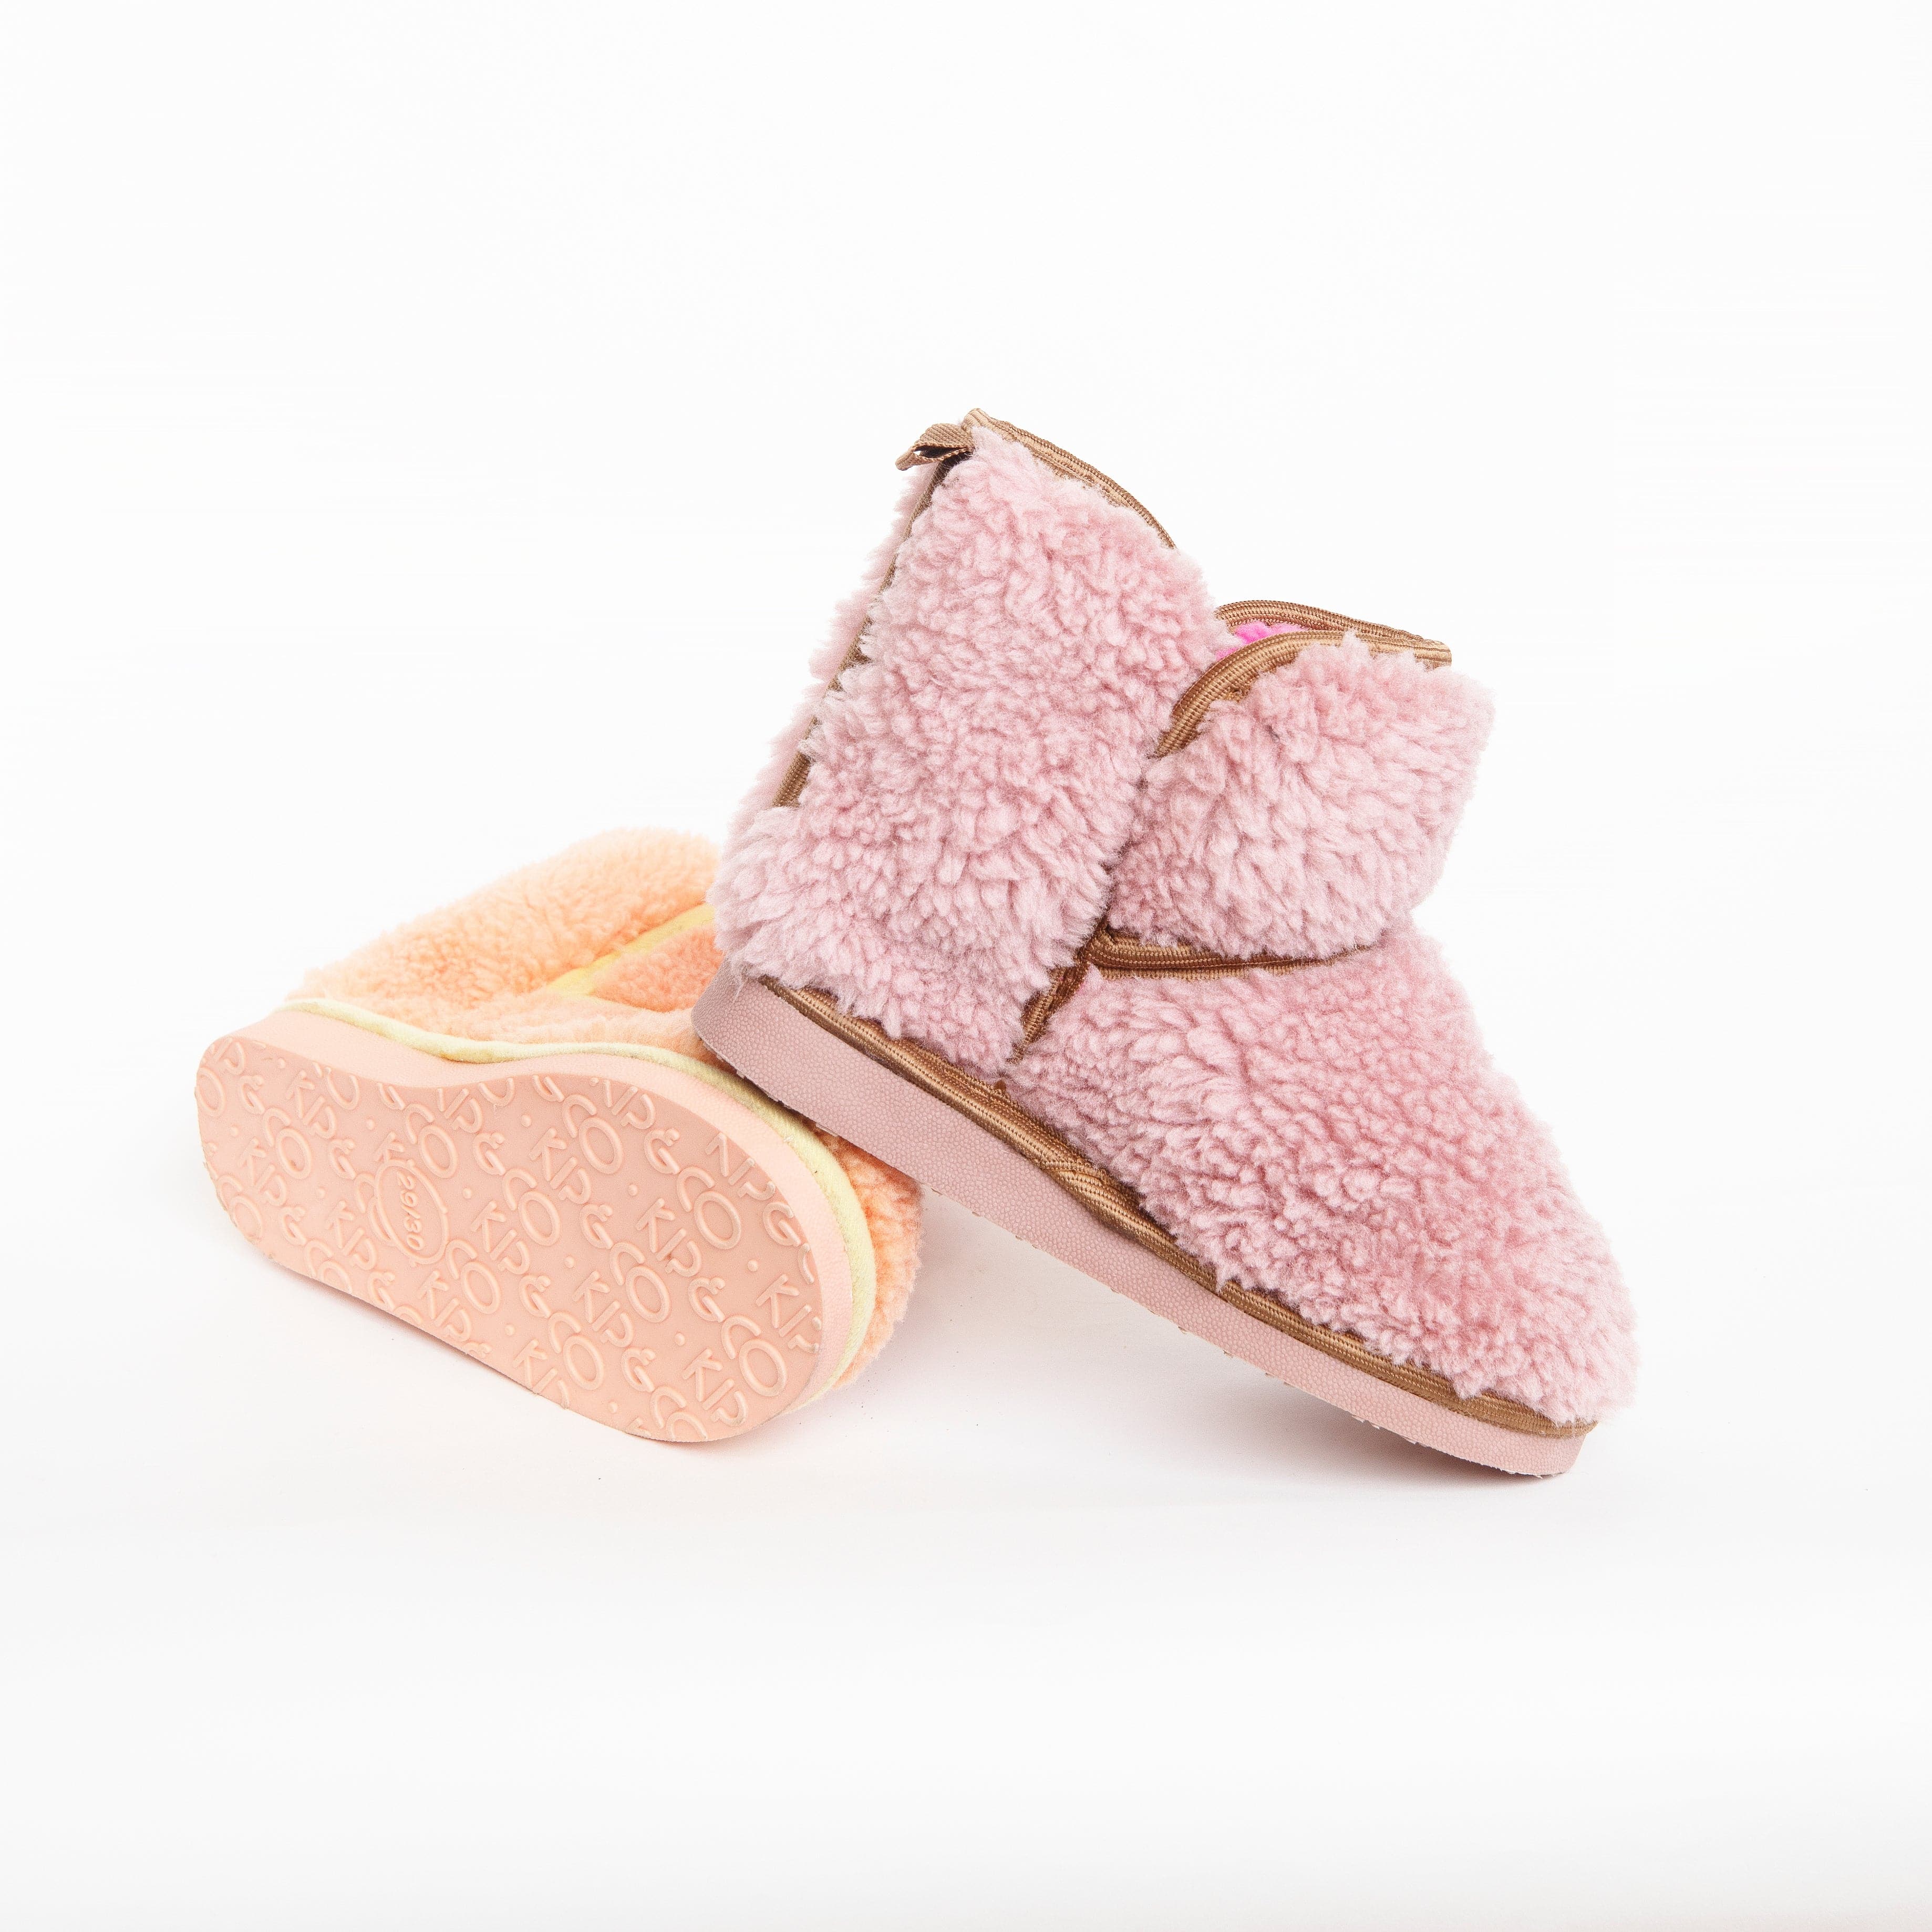 KIP & CO | Roses and Chocolate Boucle Boots KIDS